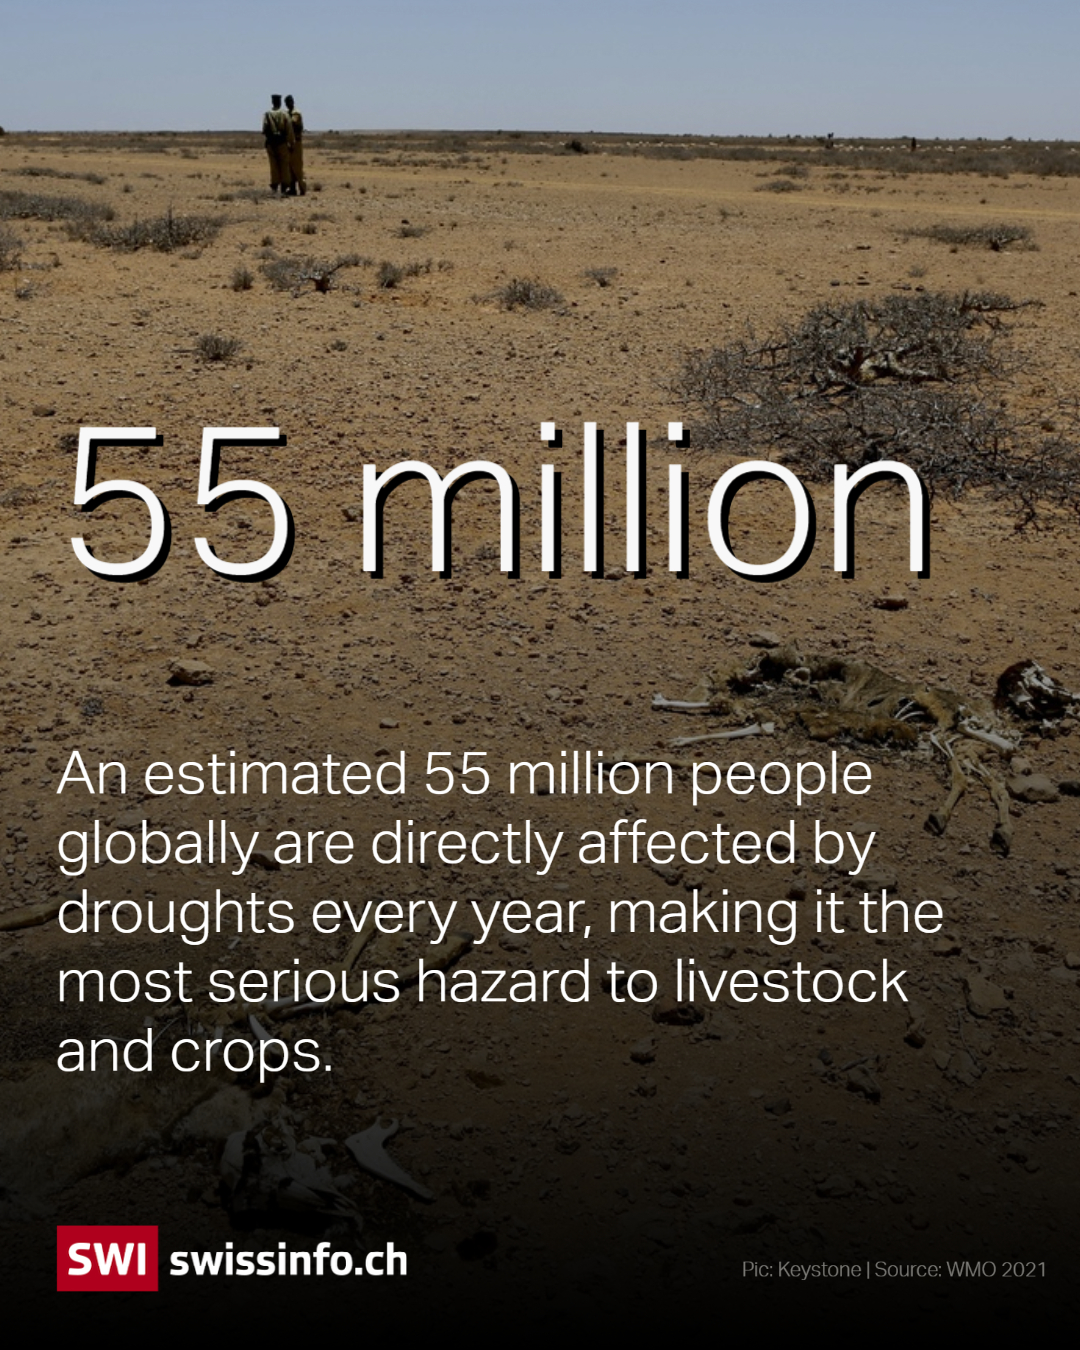 55 million people globally are affected by droughts